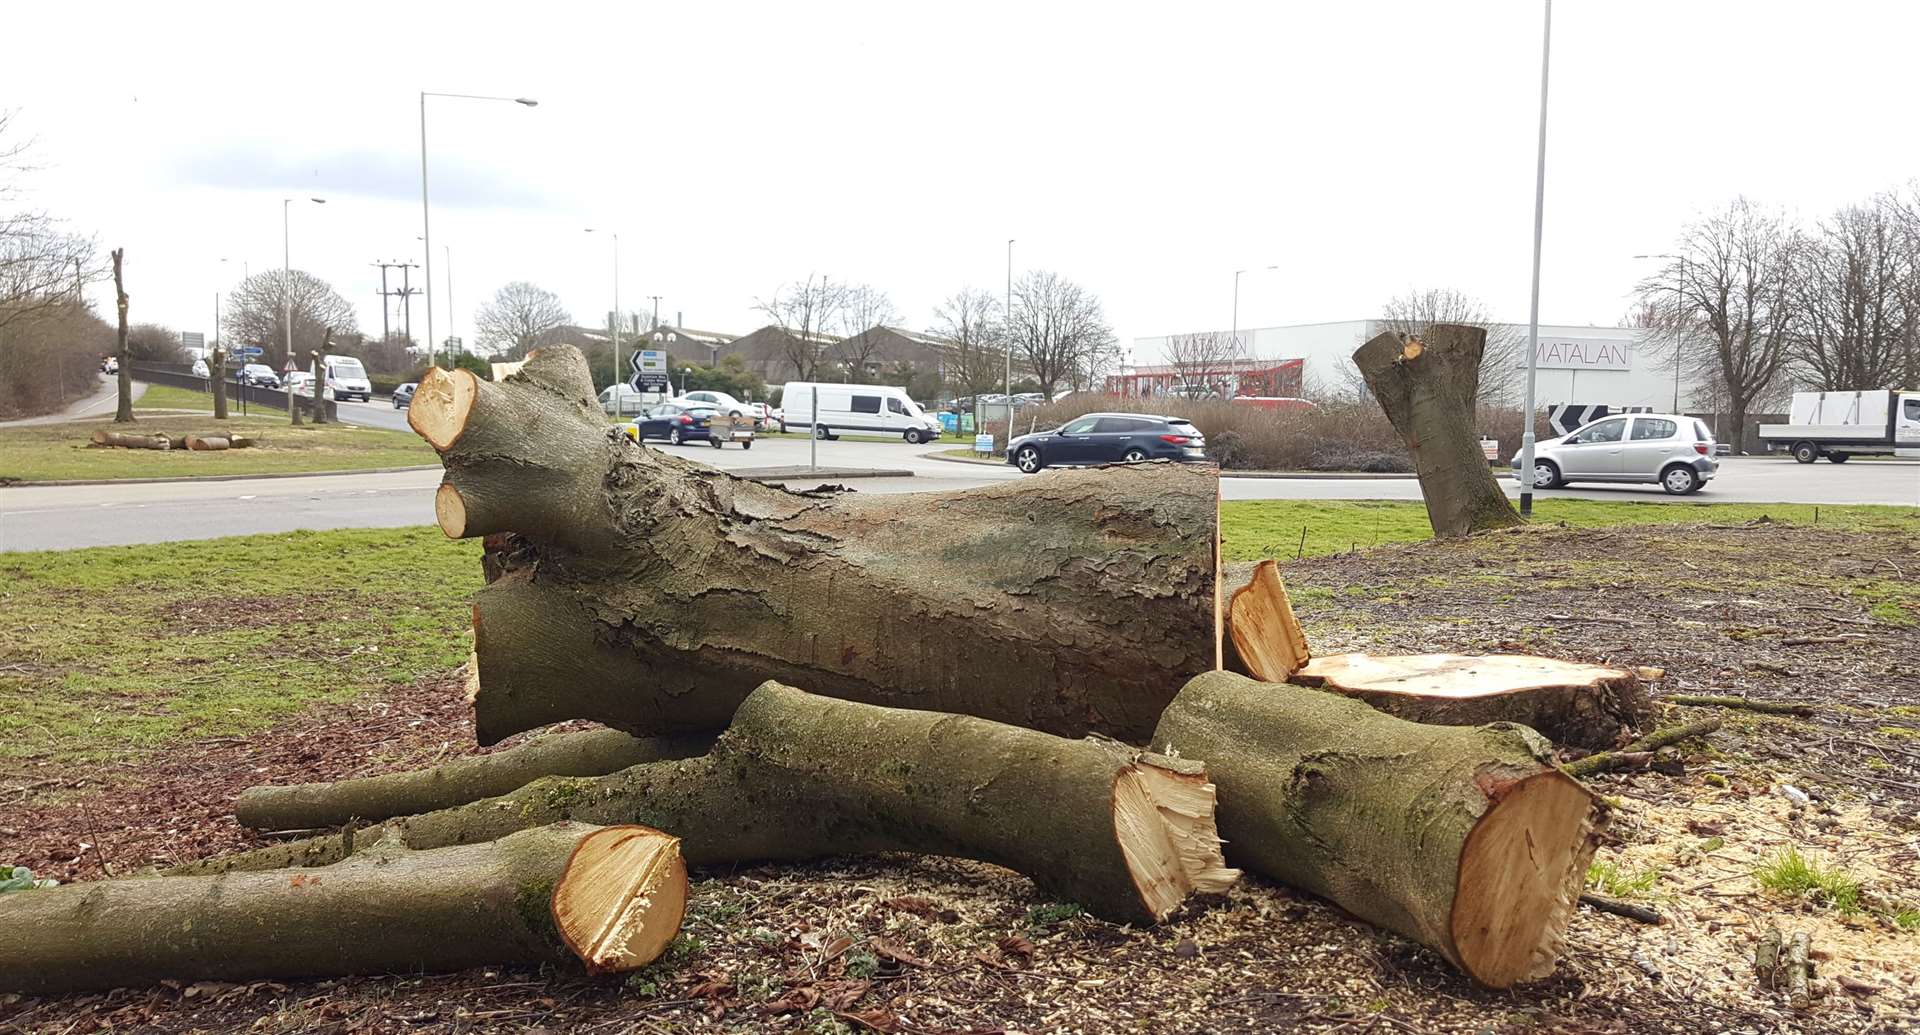 Trees were cut down in Chart Road in 2018 for the dual carriageway scheme, but work is yet to start